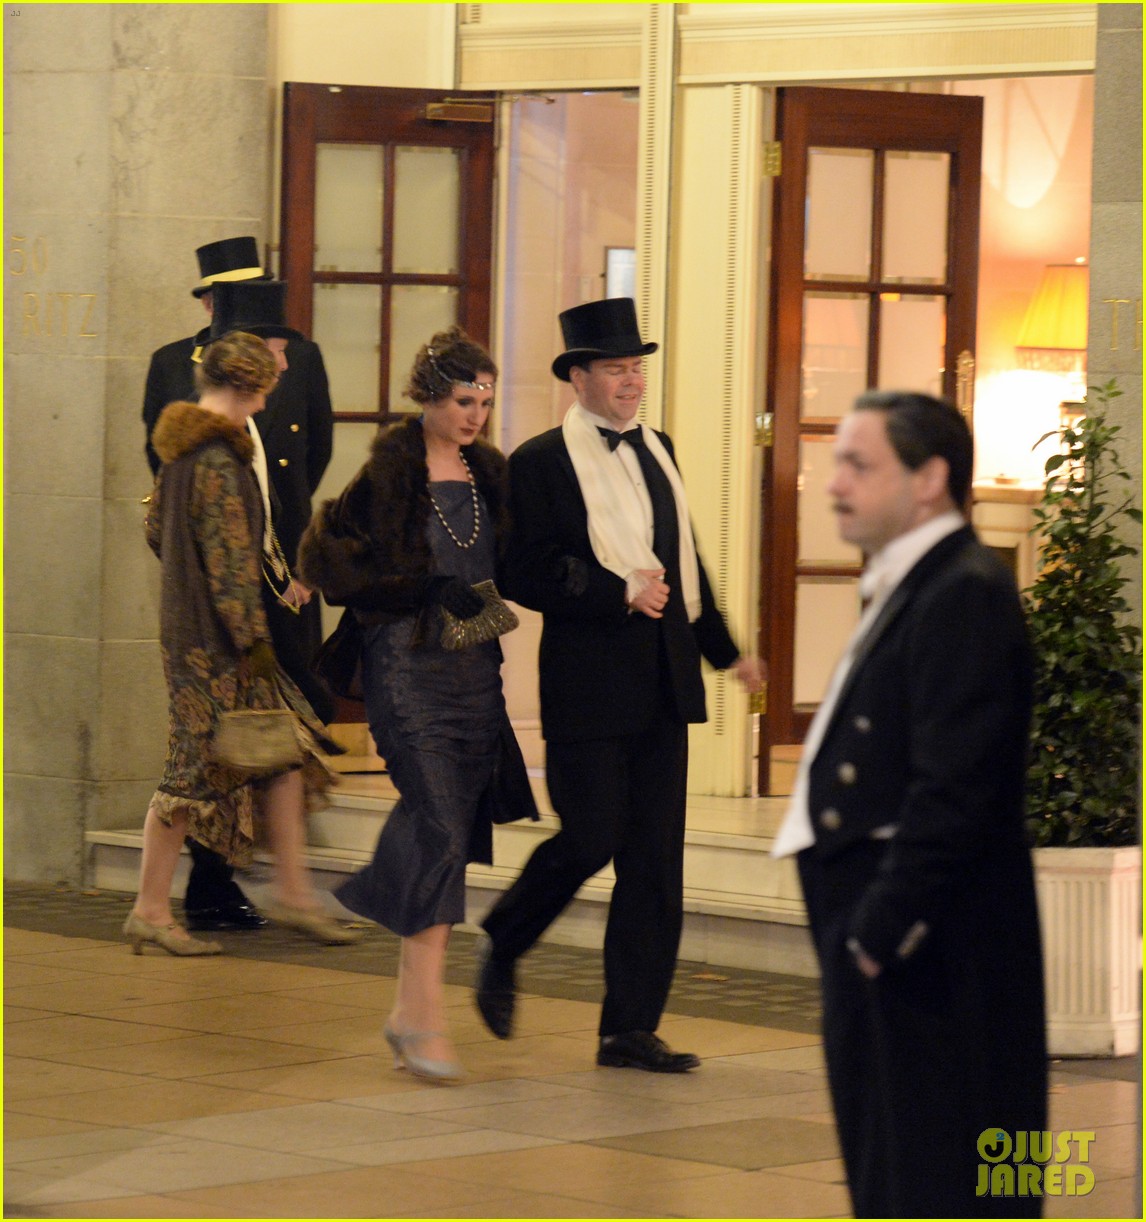 downton abbey cast get dressed up for wrap party 10